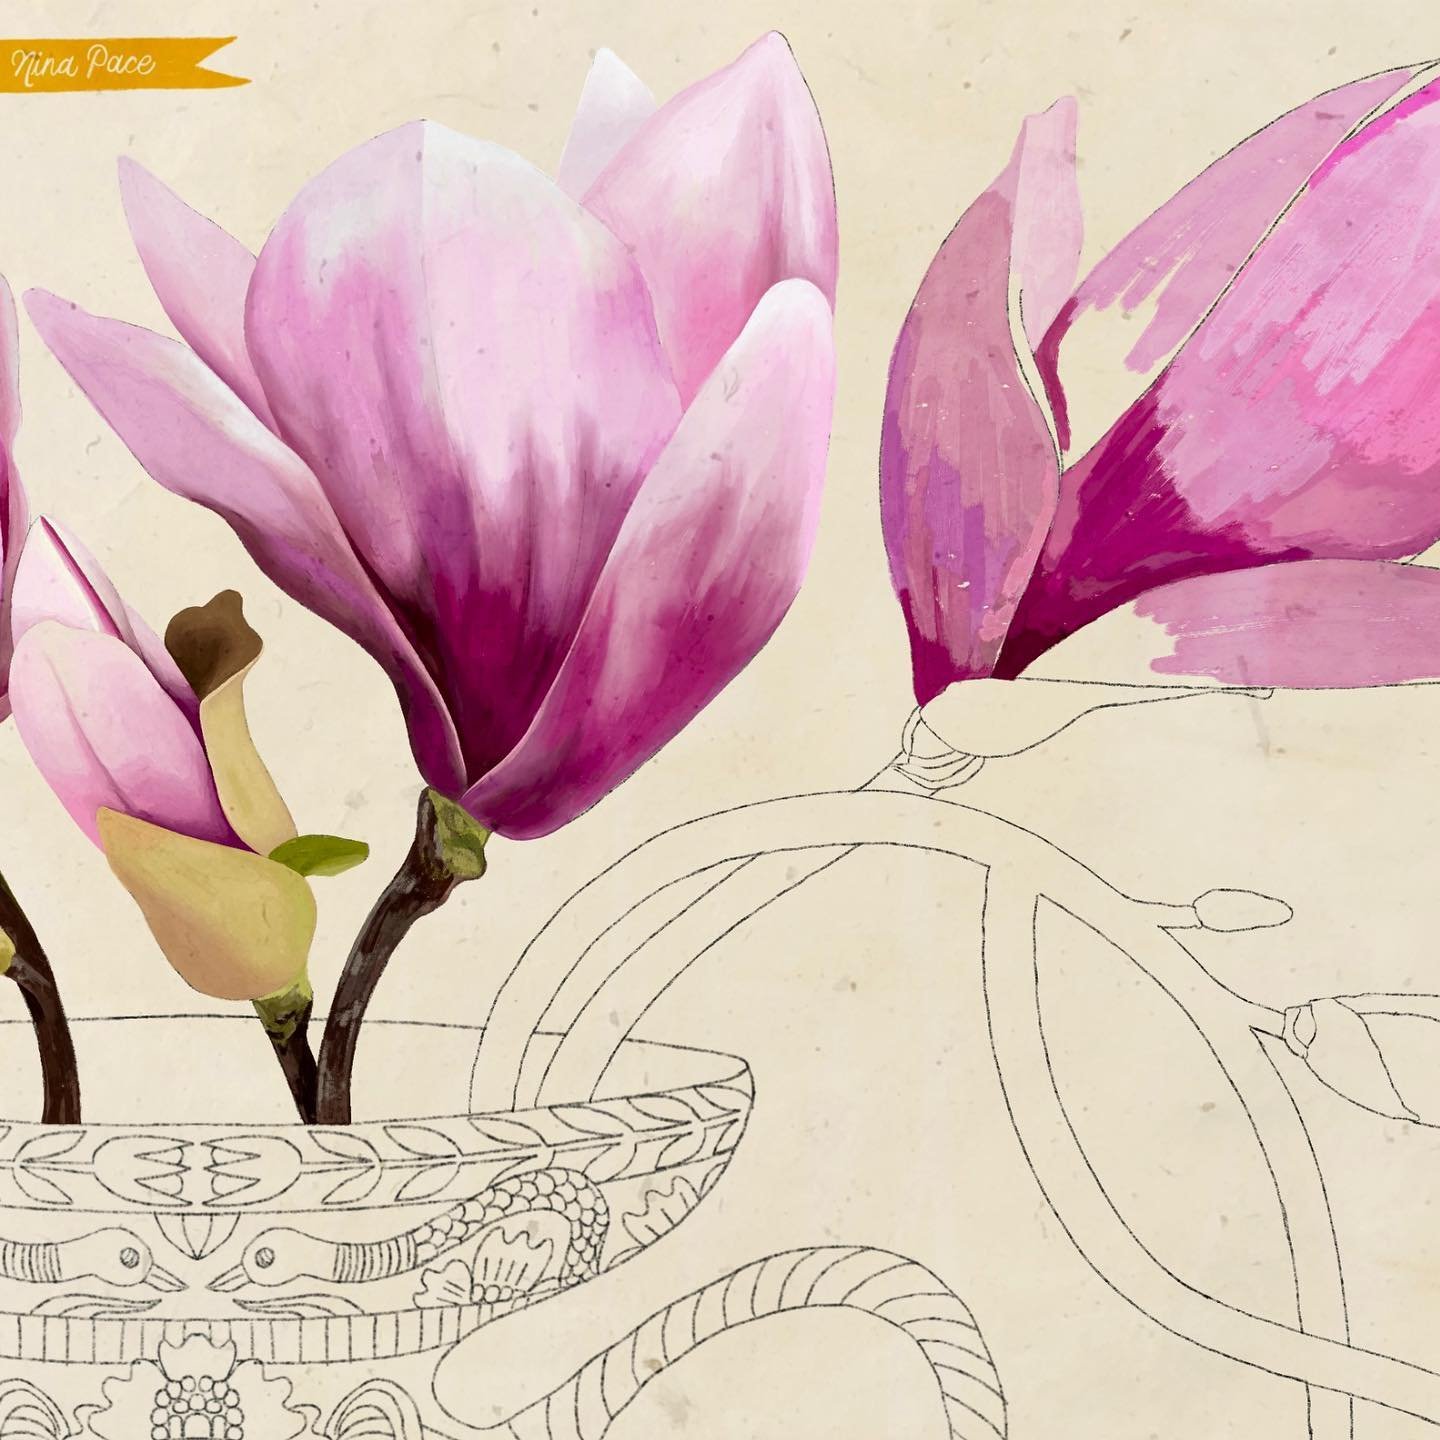 Happy Friday! Here&rsquo;s an &ldquo;in progress&rdquo; shot of a personal piece I&rsquo;ve been working on in the quiet moments before I go to sleep at night. The magnolias here in New York have already dropped their petals, but I&rsquo;m happy to s